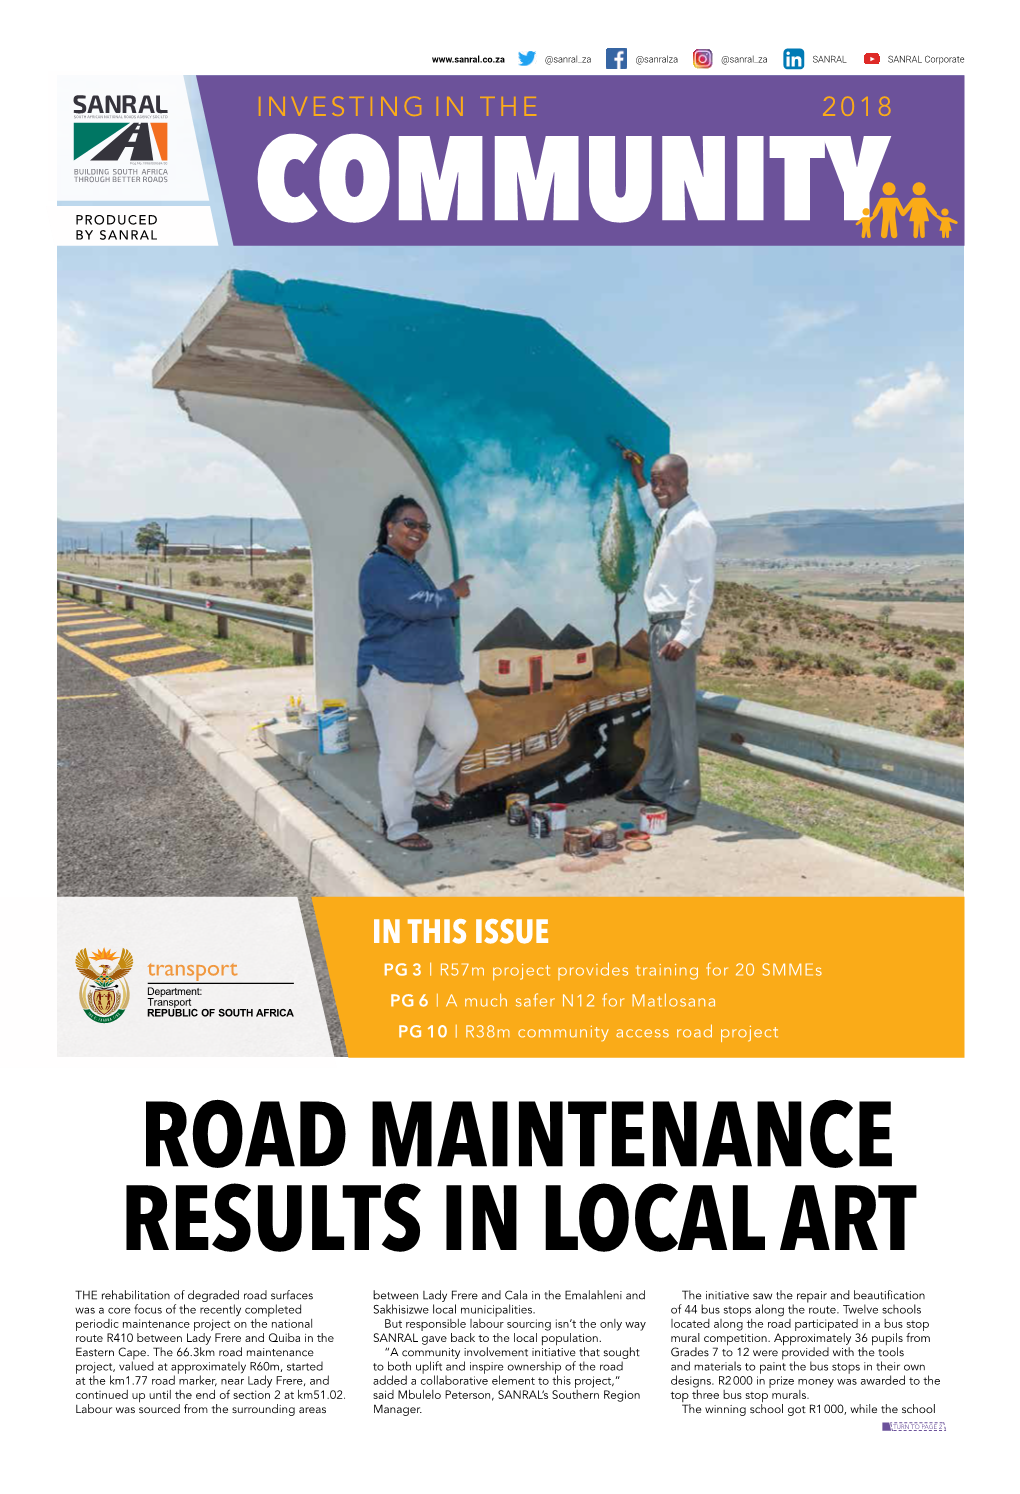 View the Latest Sanral – Investing in Community Publication Here